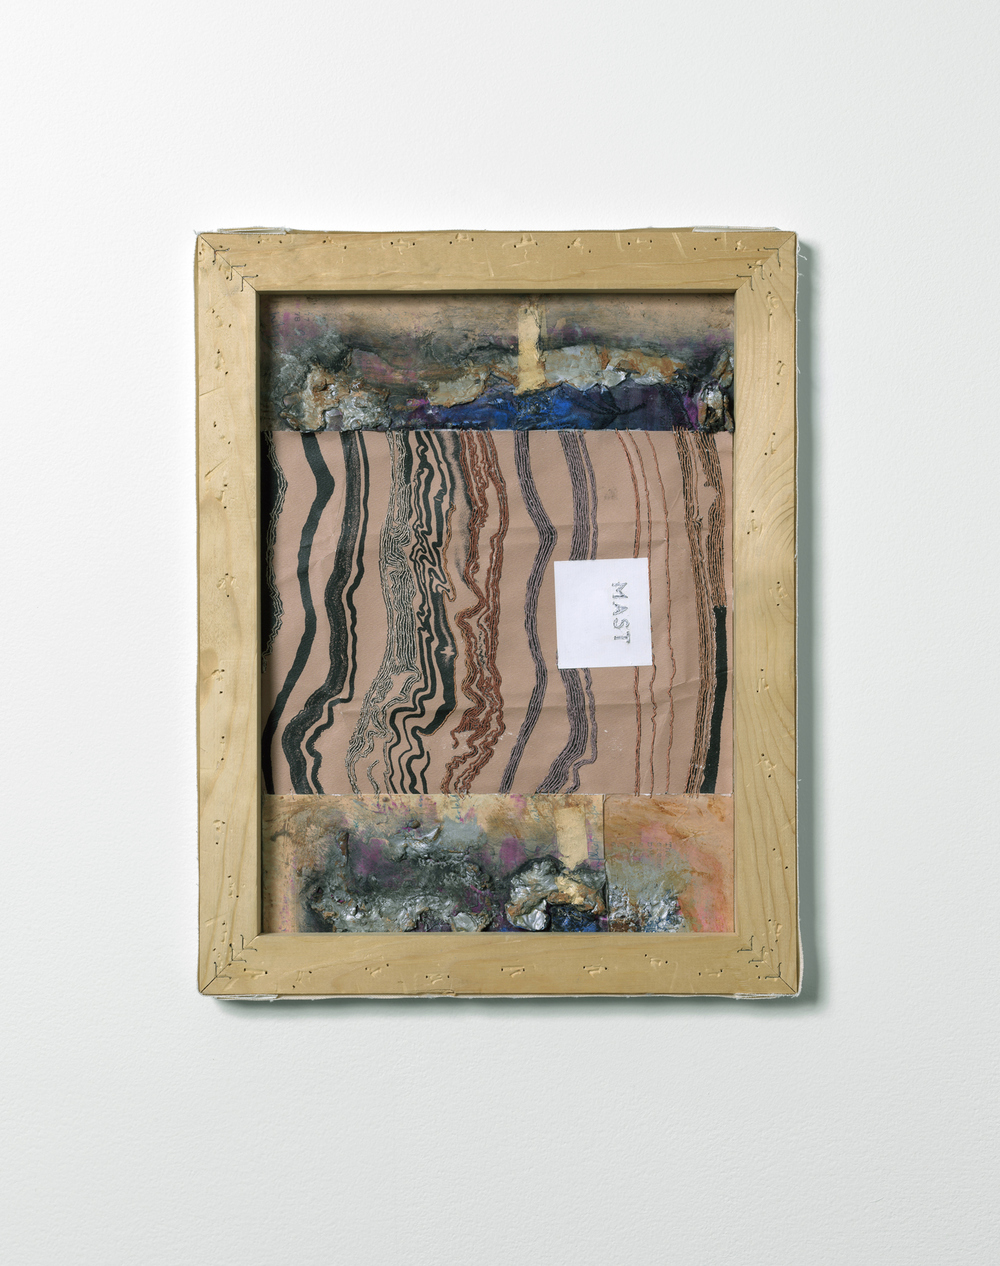 Nicola Ginzel  Archive/ Selected Flatwork  Wrapper embroidered with thread by hand, backed with fabric, collaged with oil pastel, printing ink, dress parts, inside stretcher